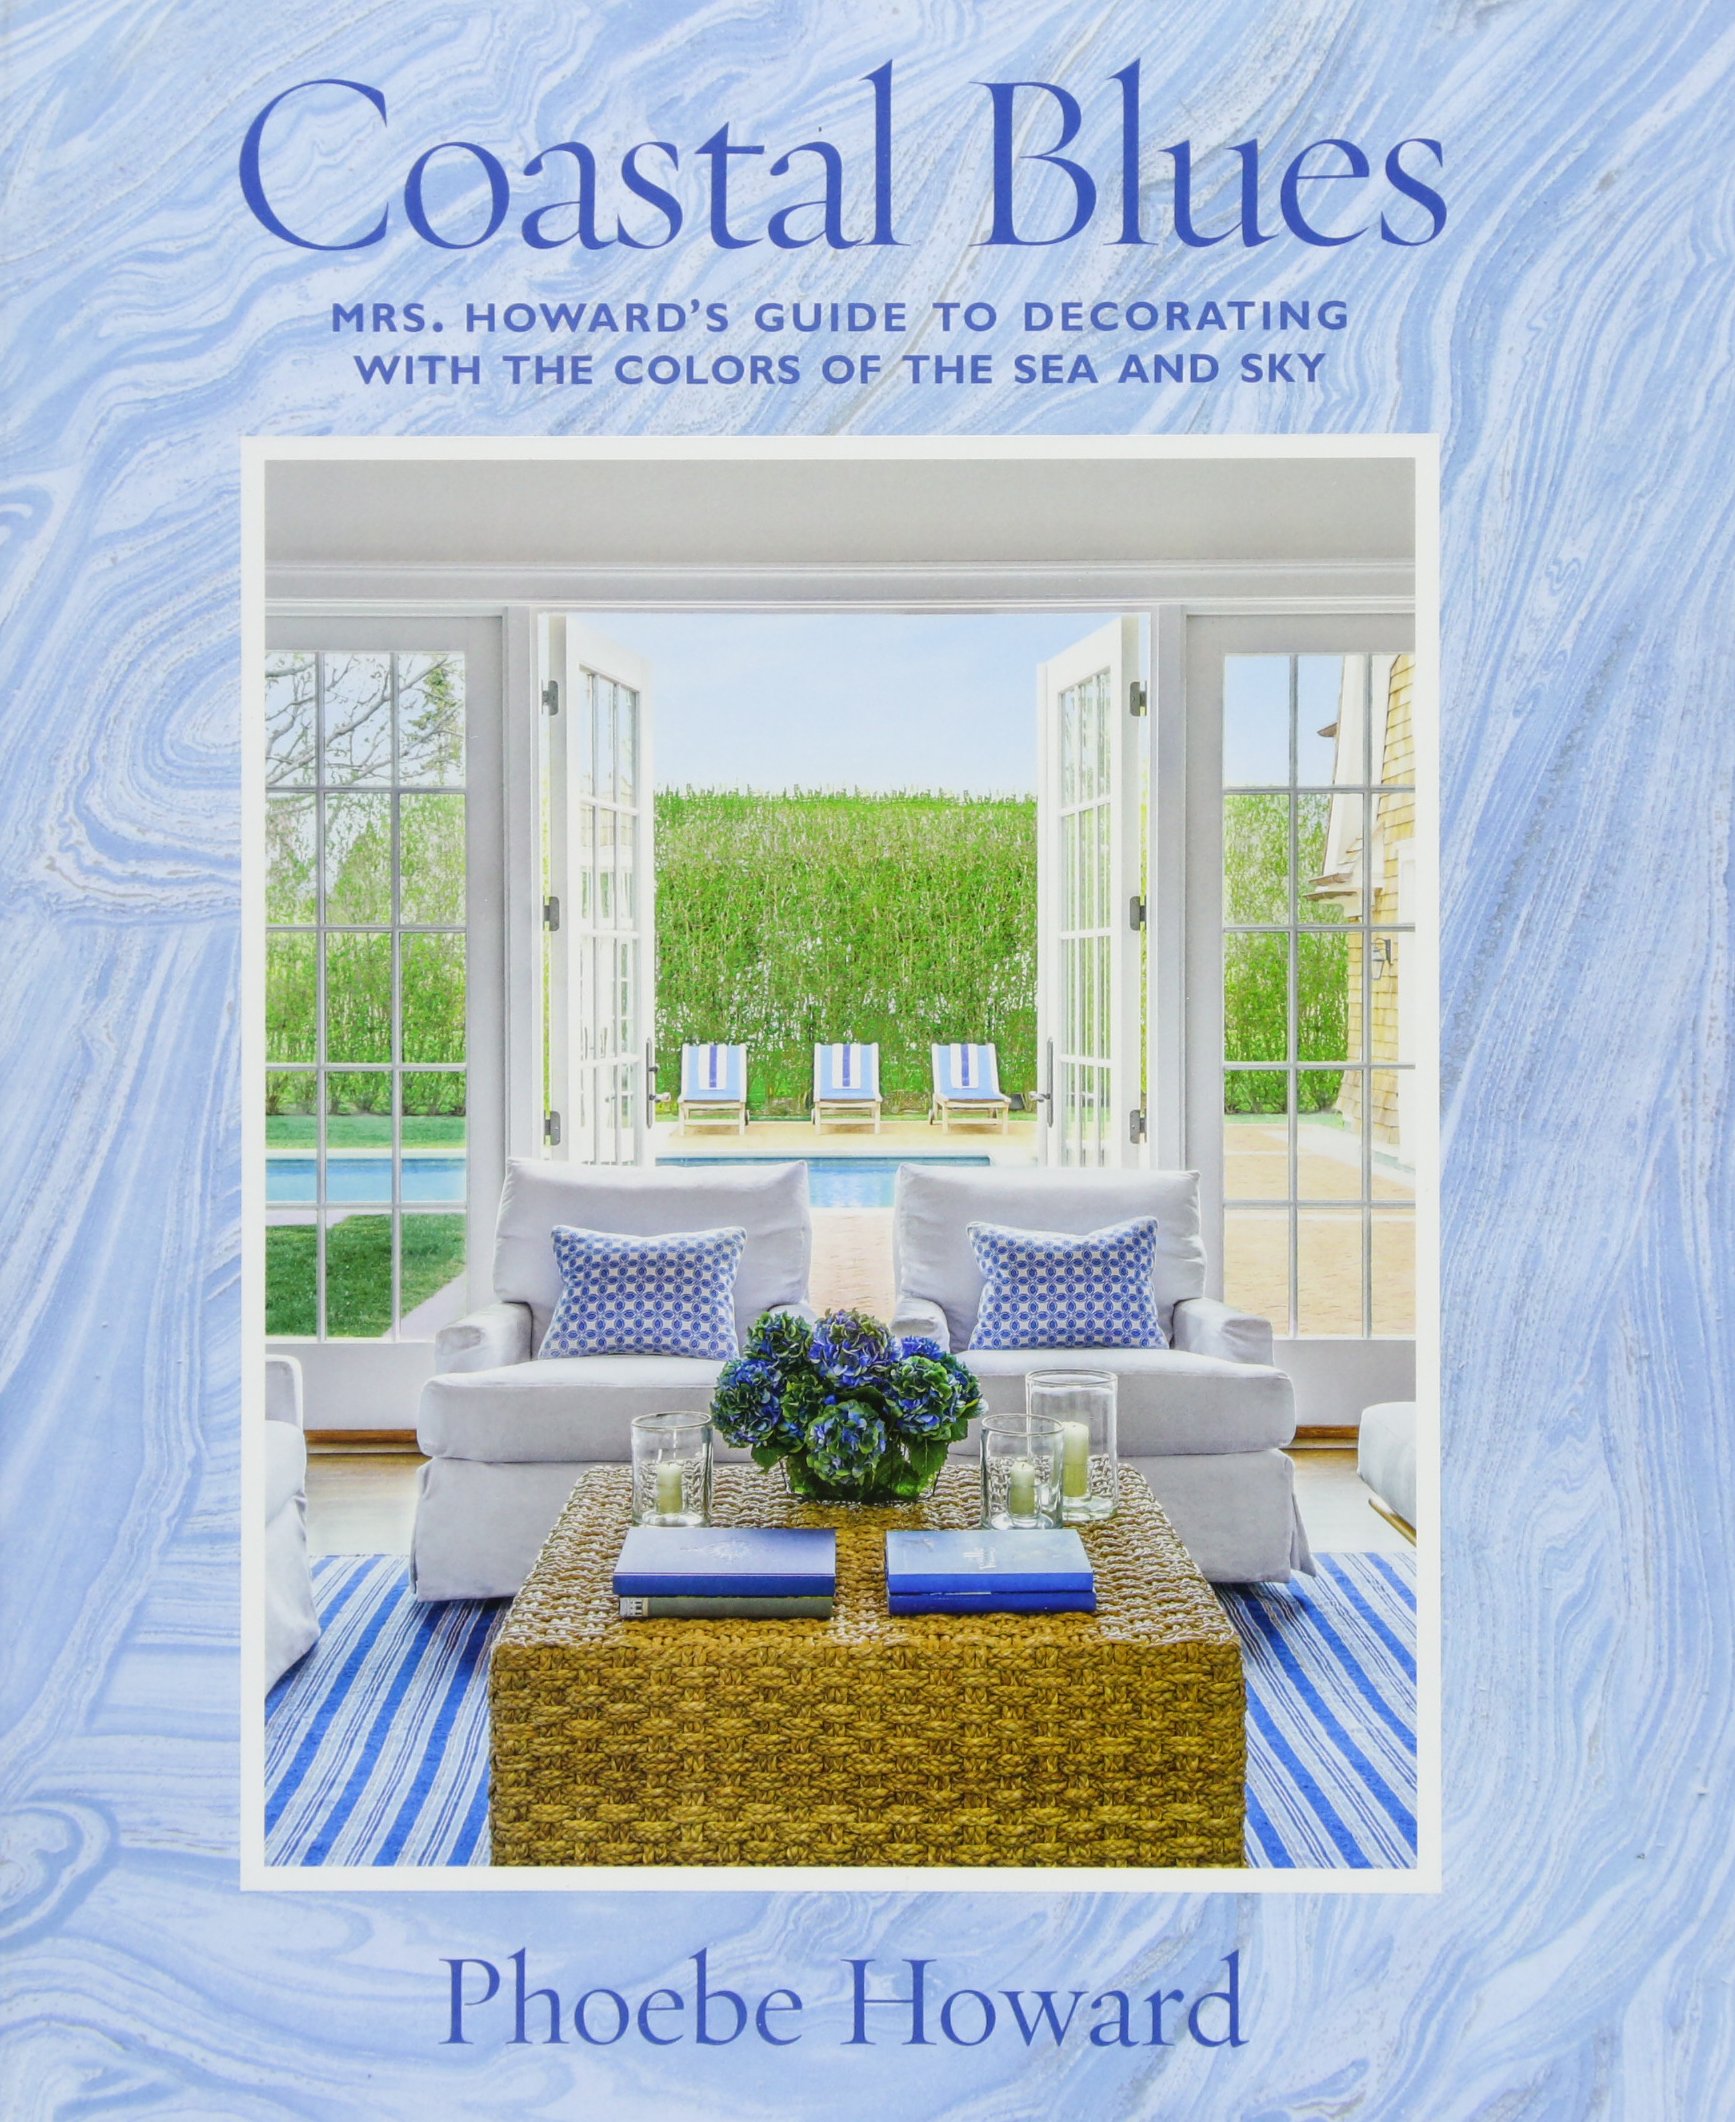 The best coffee table books about decorating - Green WIth Decor